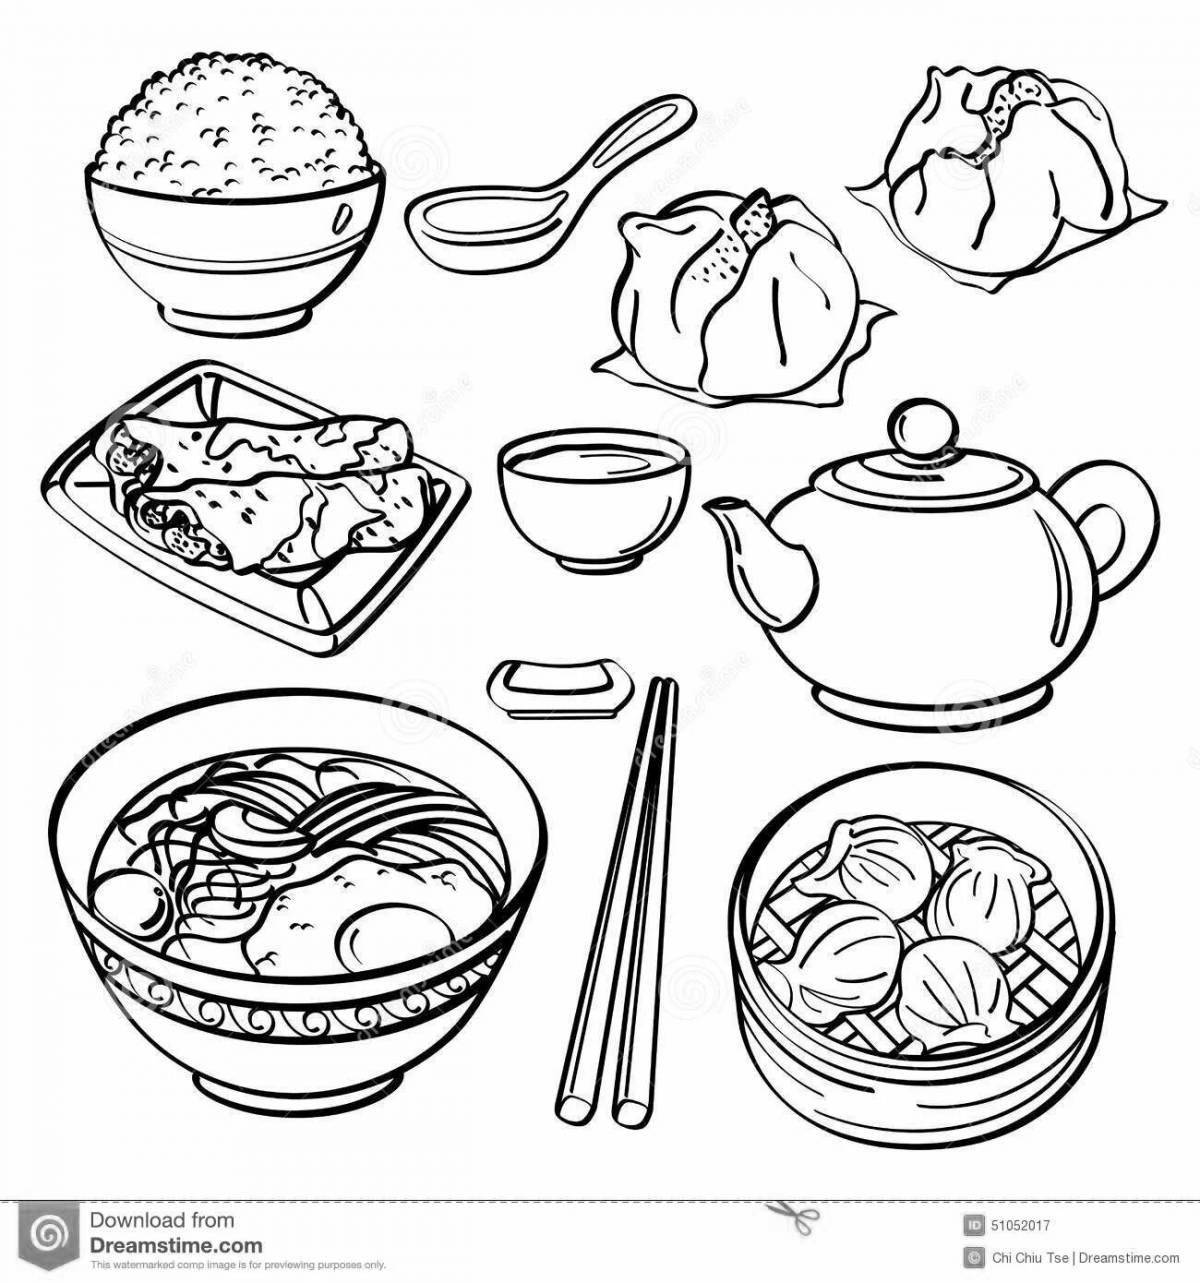 Coloring page traditional Russian cuisine